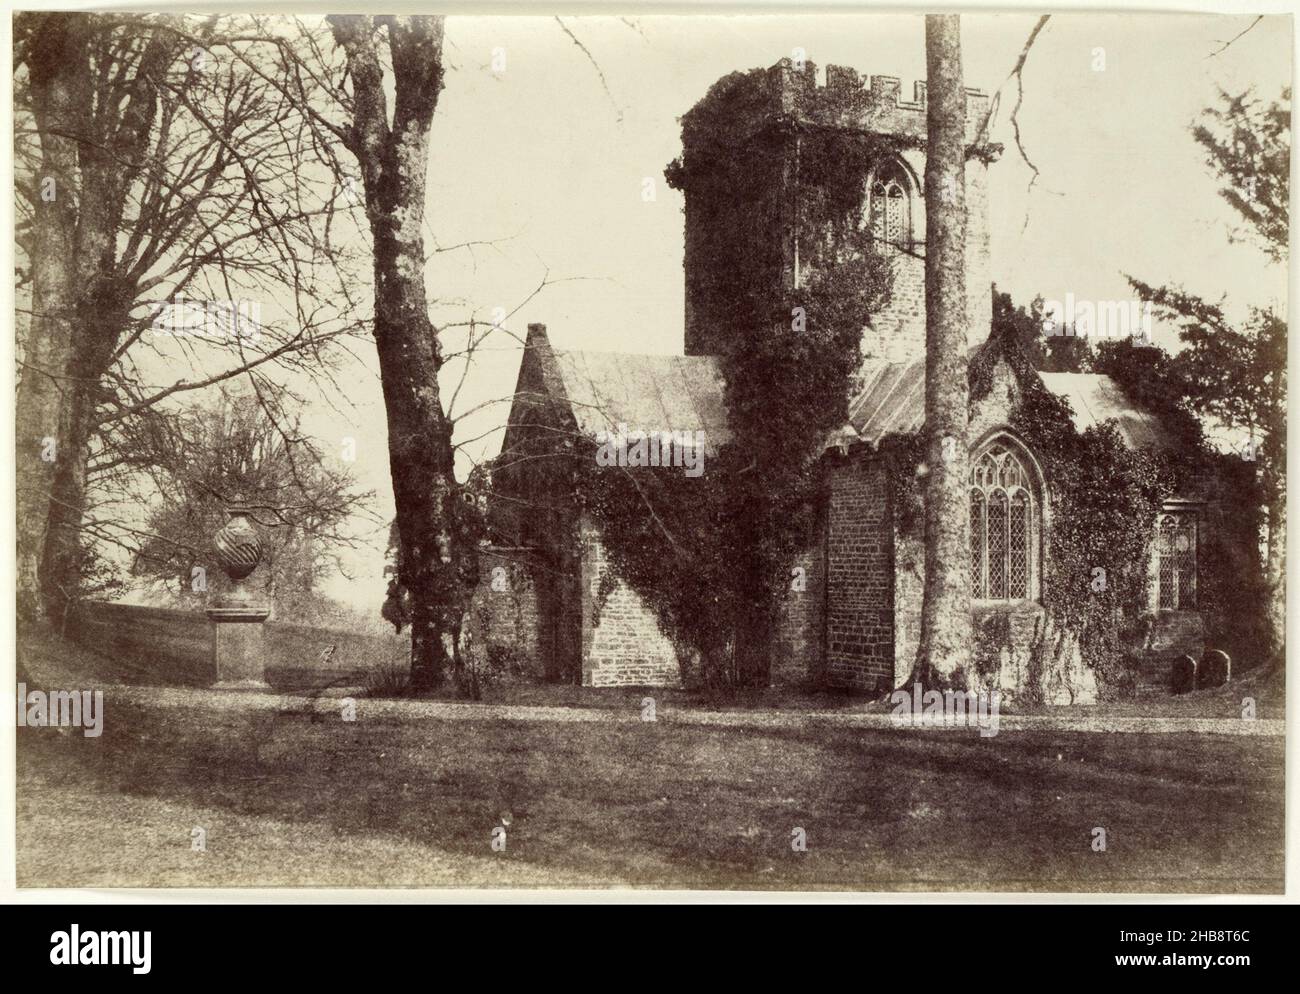 Parish church in Melbury Bubb, Dorset, anonymous, Melbury Bubb, c. 1850 - c. 1855, photographic support, salted paper print, height 200 mm × width 290 mm Stock Photo